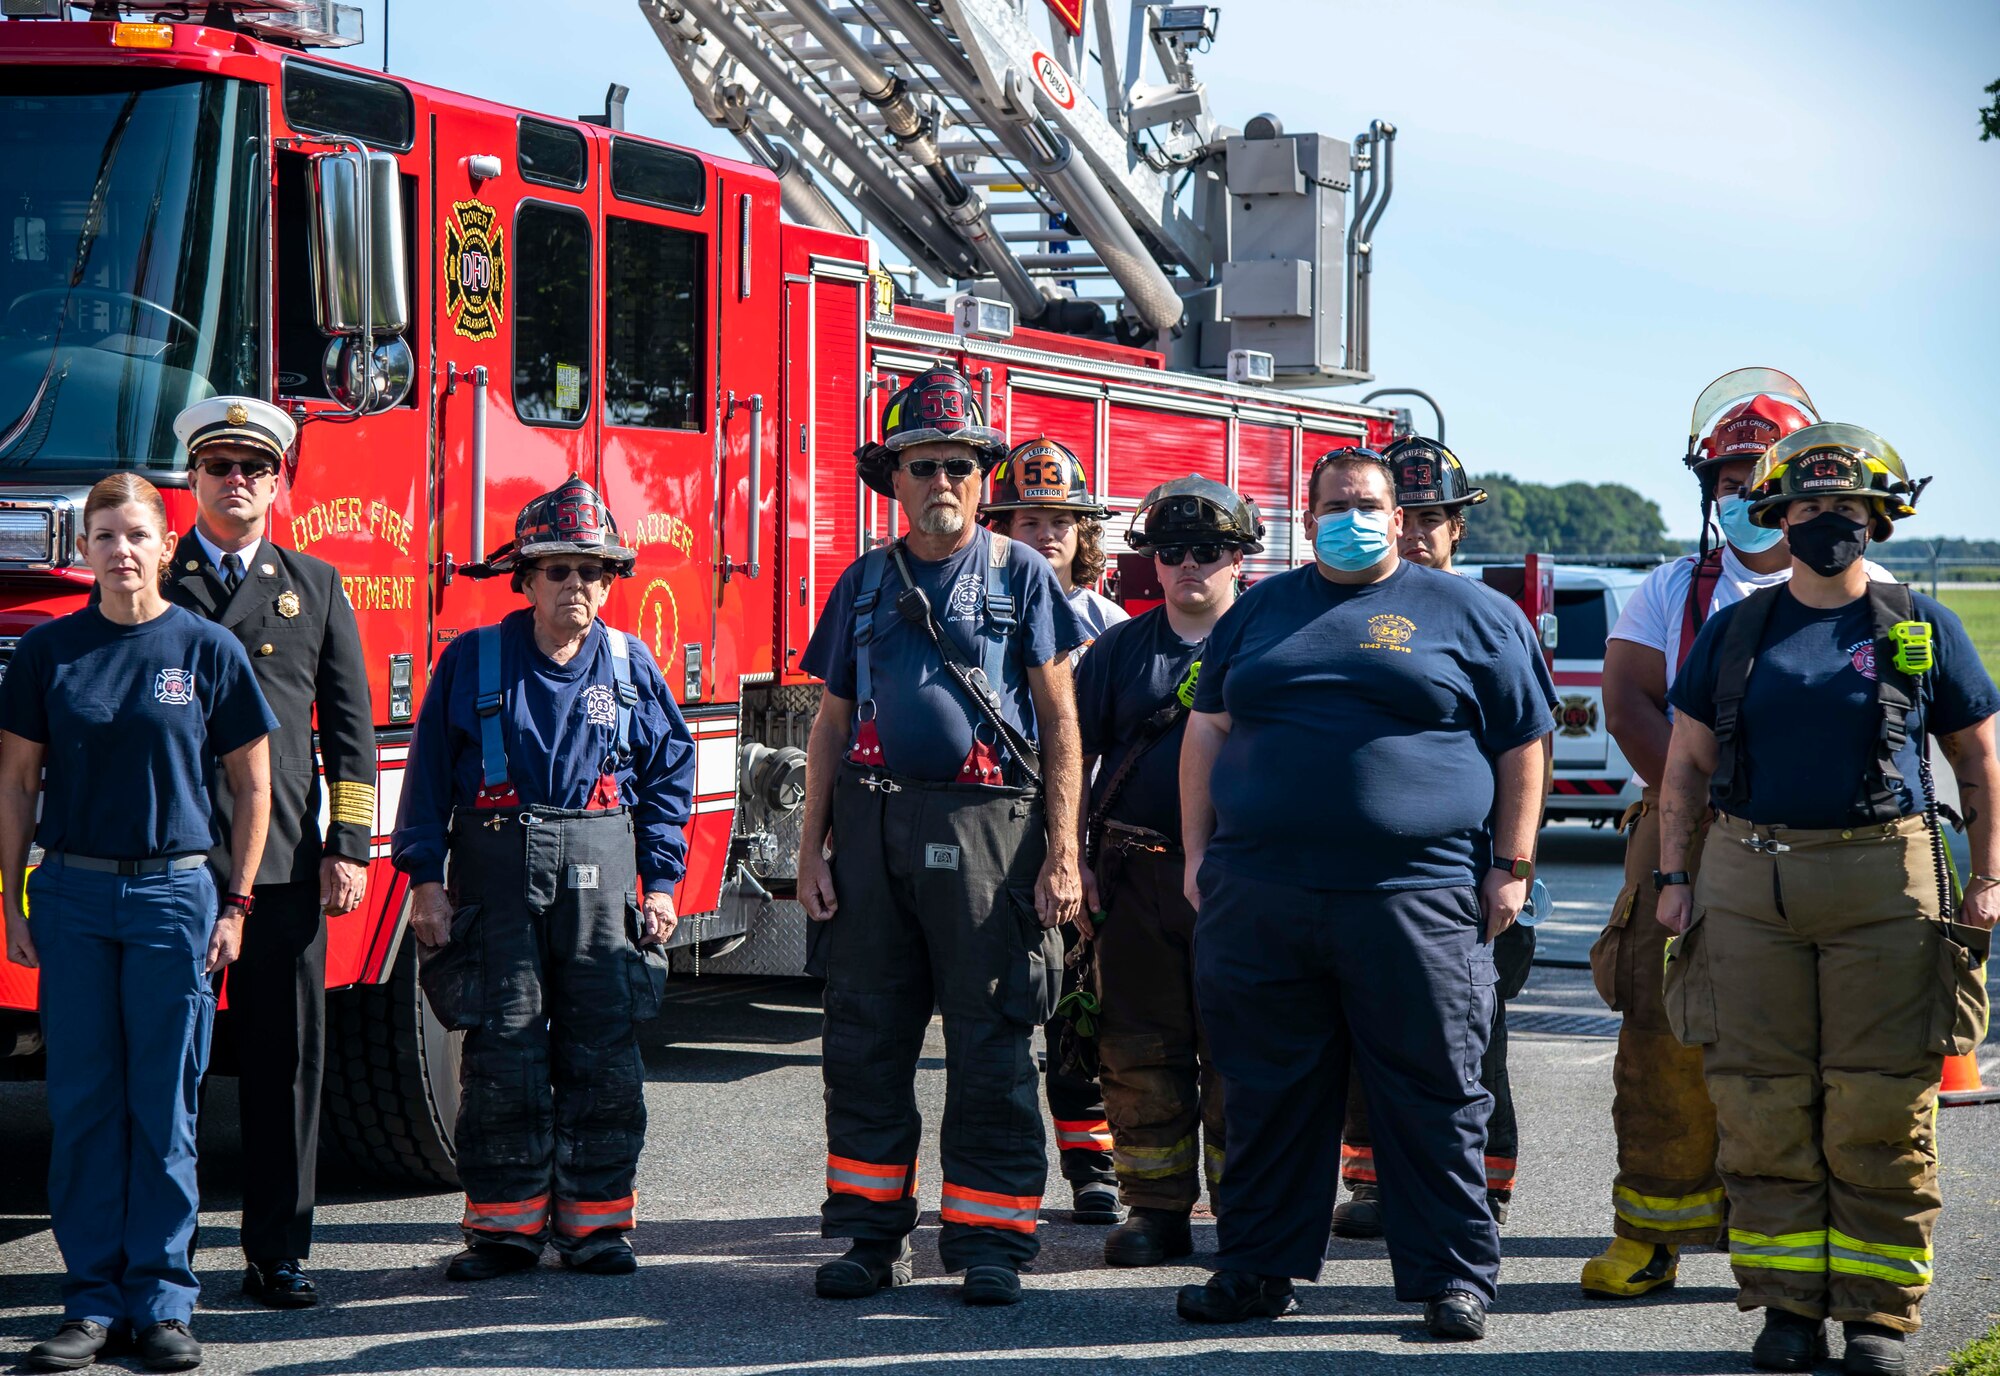 Members of the Dover Fire Department look on during the 20th Anniversary 9/11 Remembrance Ceremony held at the Air Mobility Command Museum’s 9/11 Memorial on Dover AFB, Delaware, Sept. 11, 2021. The base hosted the ceremony to remember and honor those who perished in the attacks on Sept. 11, 2001. (U.S. Air Force photo by Senior Airman Stephani Barge)